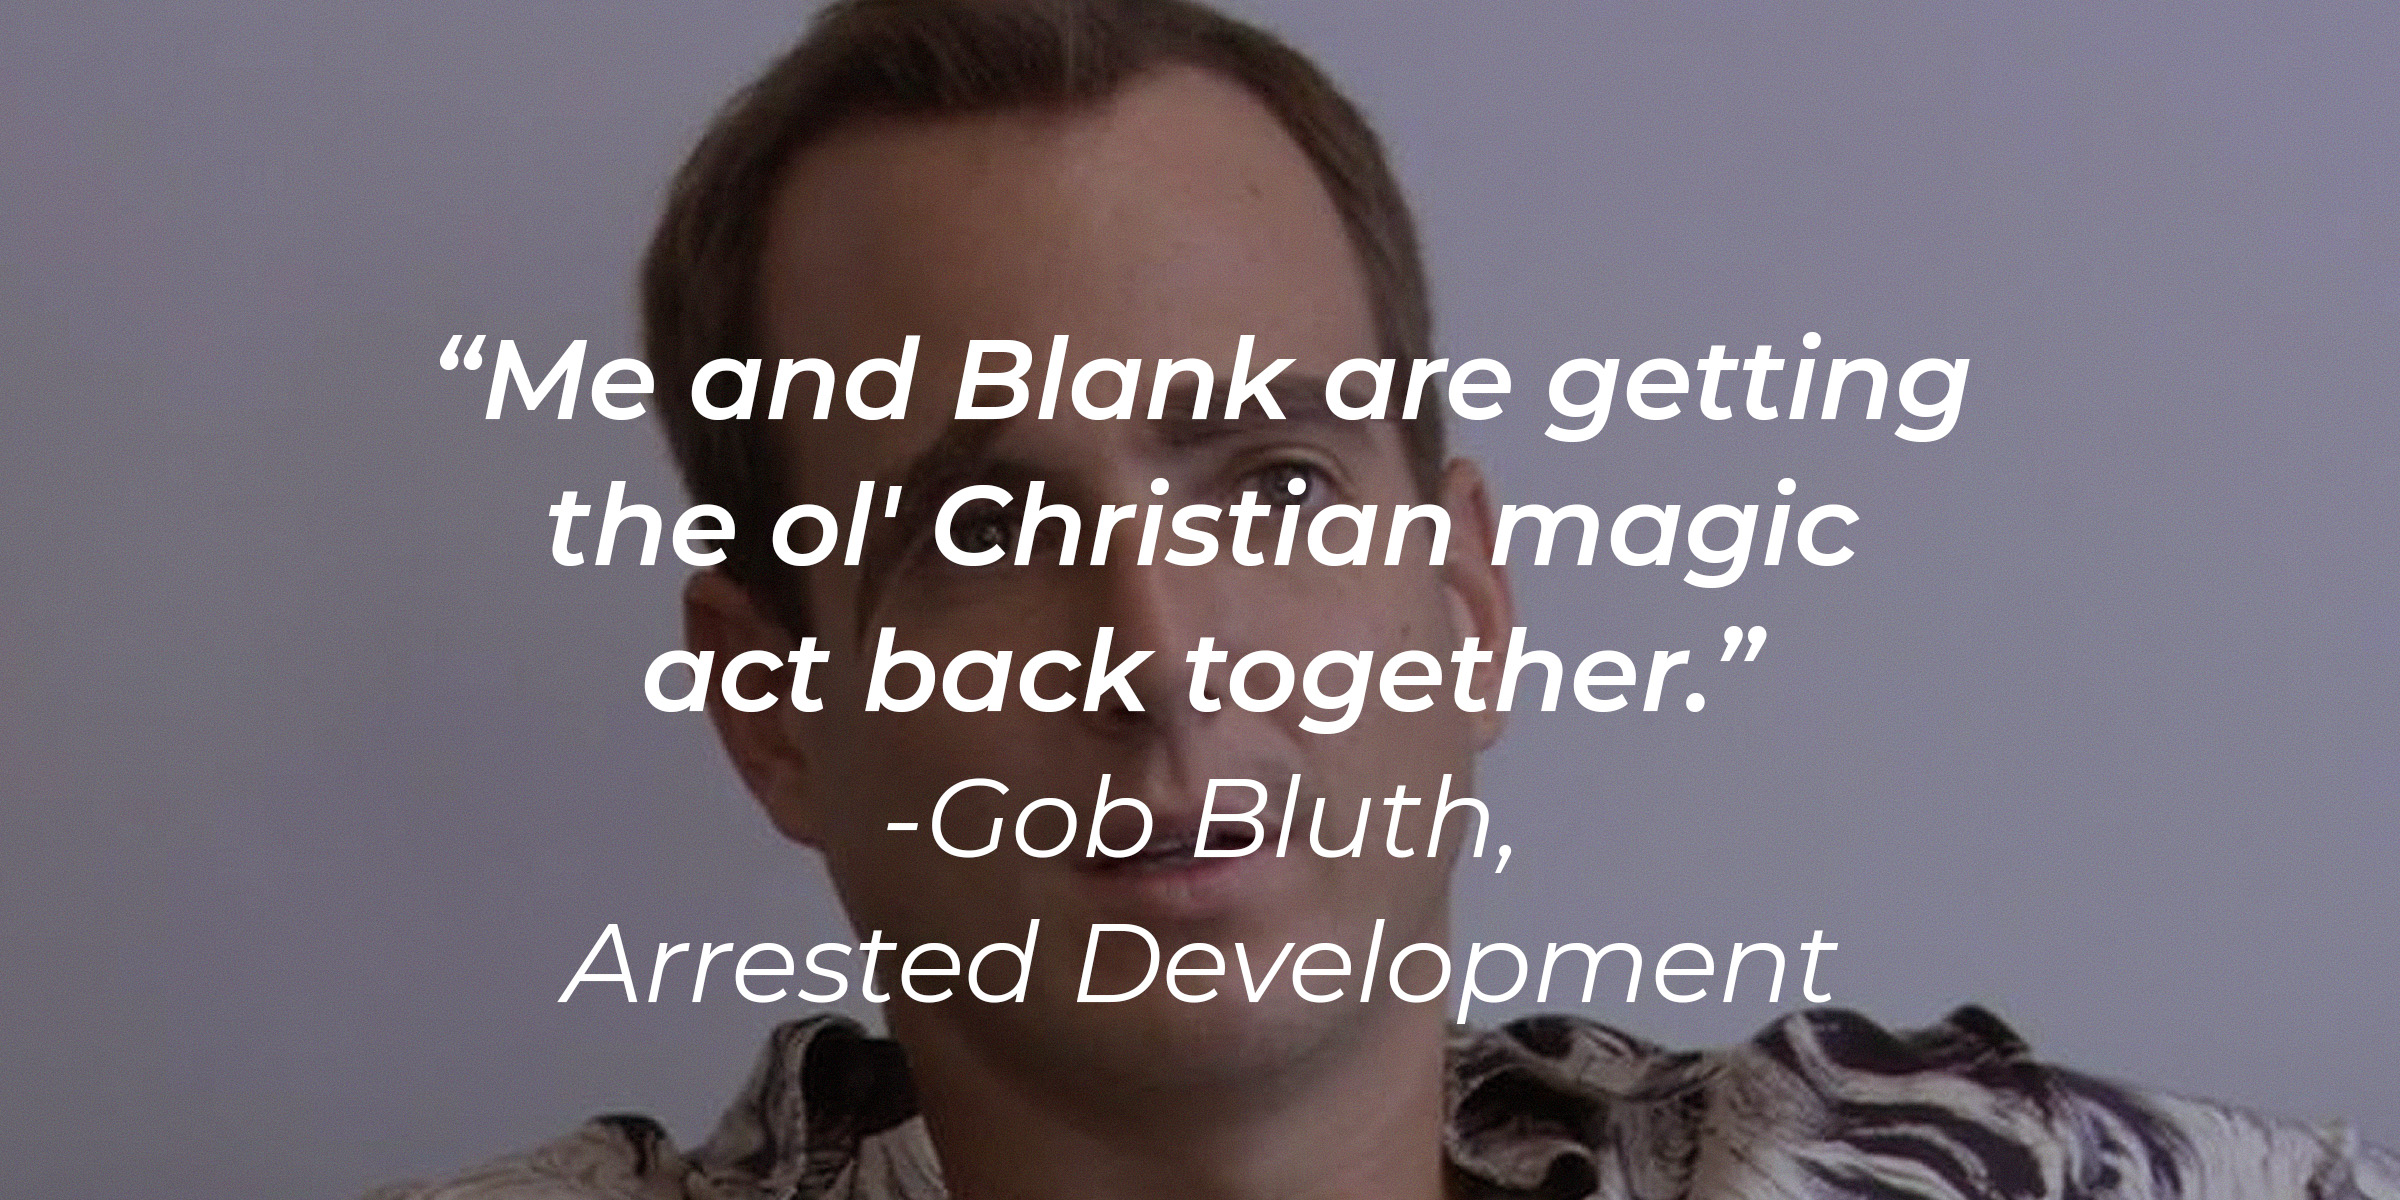 Gob Bluth's quote: "Me and Blank are getting the ol' Christian magic act back together." | Source: facebook.com/ArrestedDevelopment